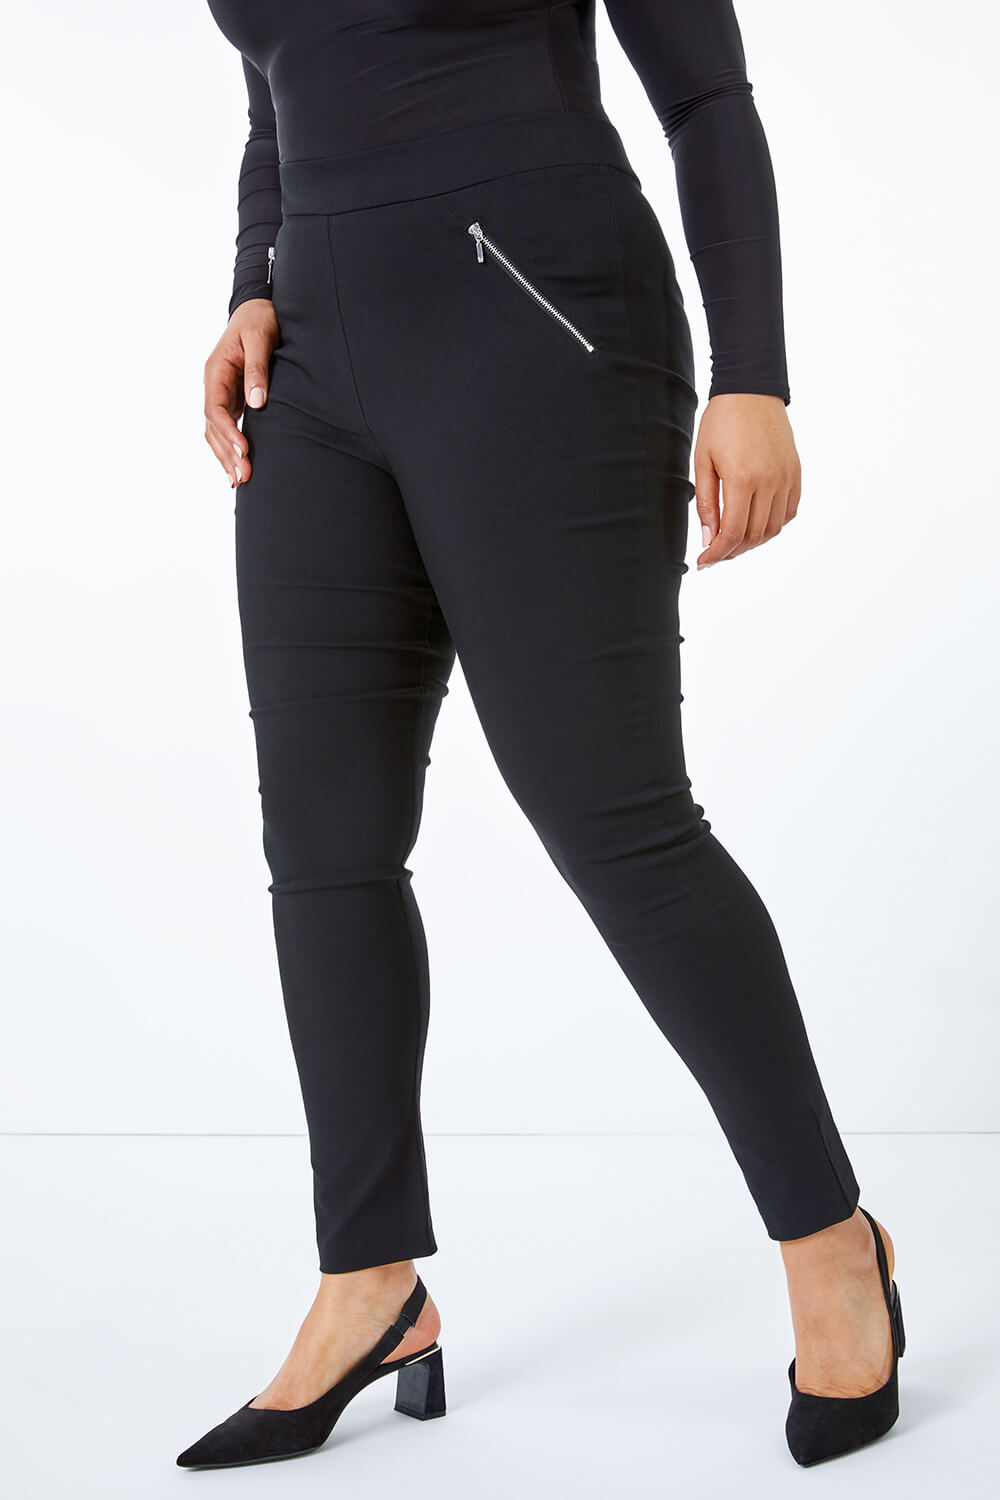 Black Curve Full Length Zip Stretch Trouser, Image 5 of 5